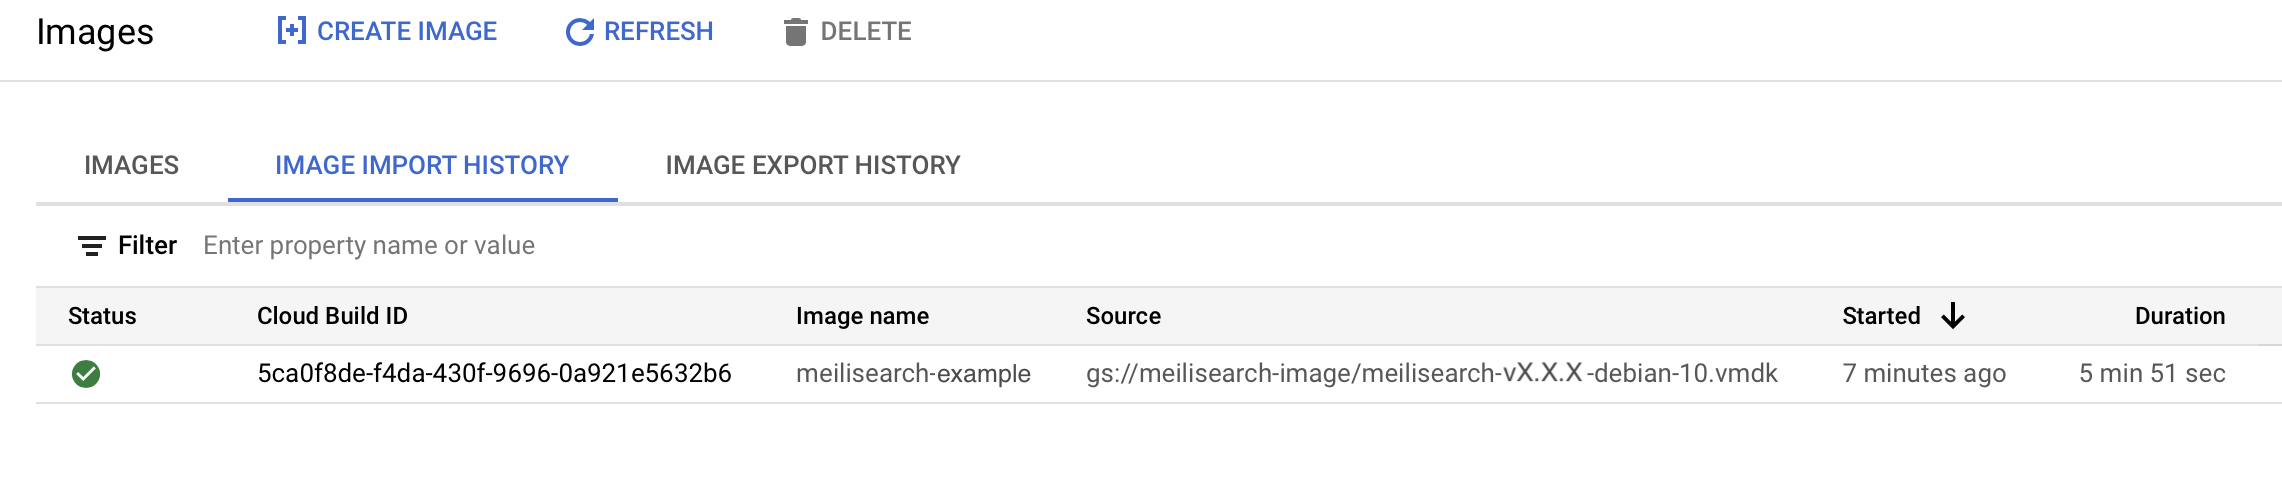 meilisearch-example successfully imported